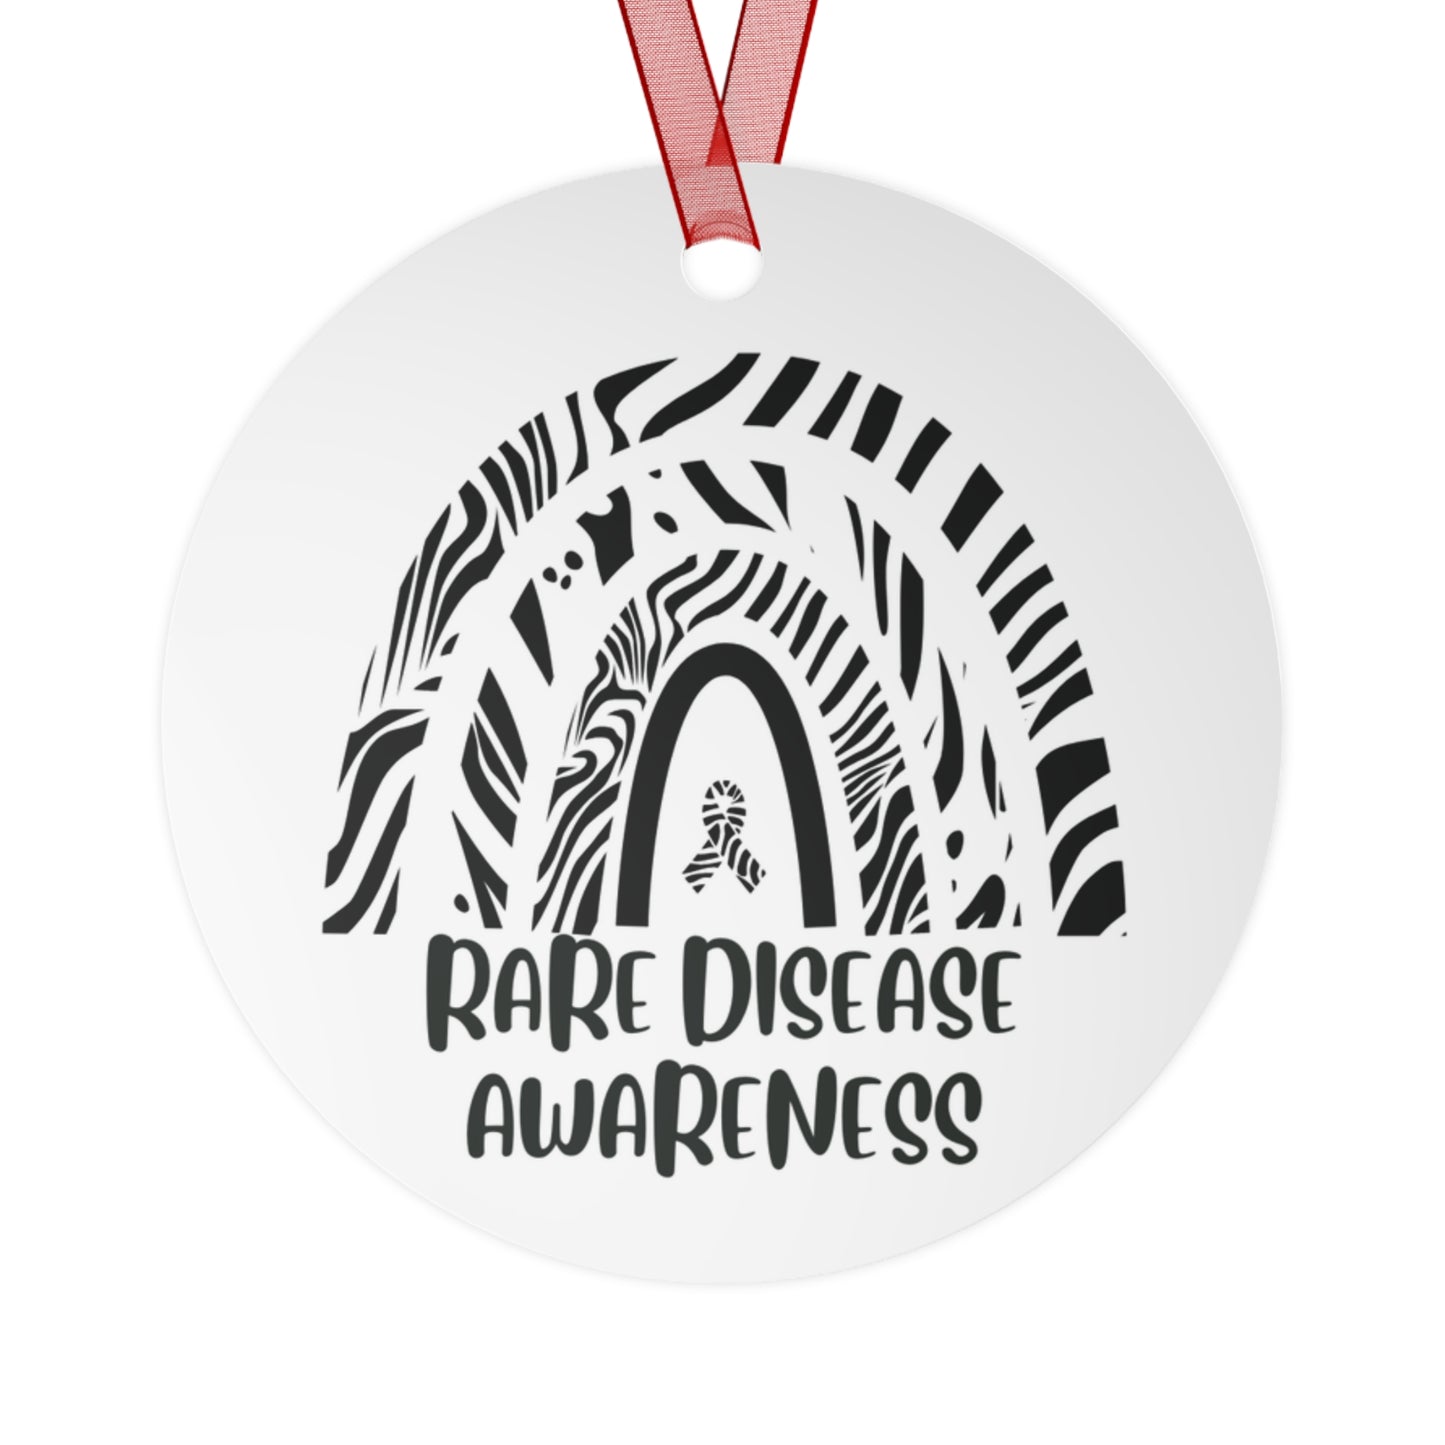 Rare Disease Awareness Christmas Ornament Stocking Stuffer Christmas Gift, Holiday Home Decor, Wall Hanging, Support for Frien